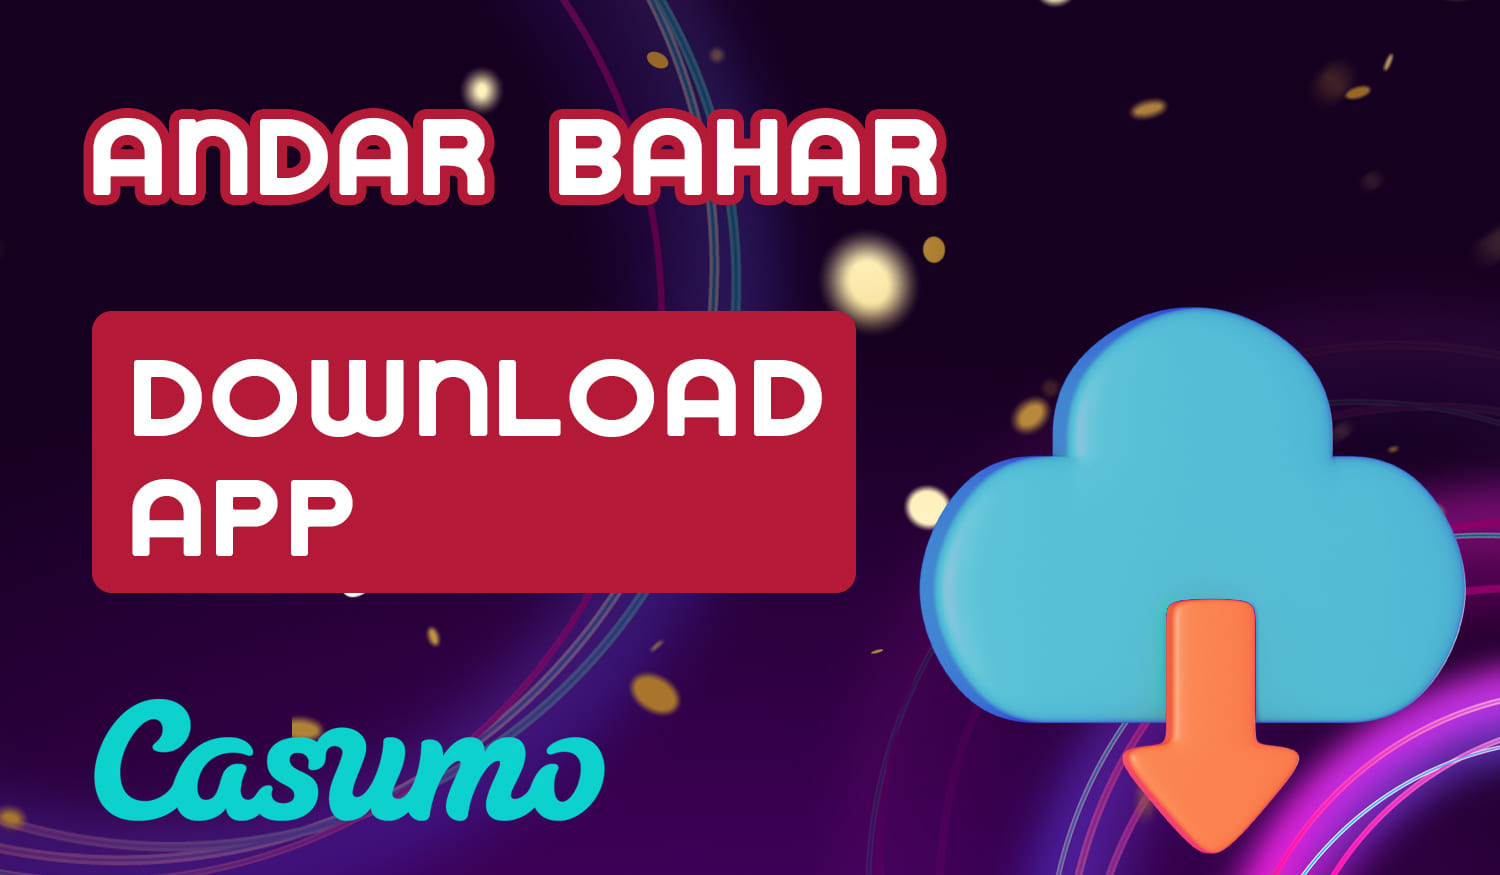 Step-by-step instructions for downloading and installing Casumo's mobile app to play Andar Bahar